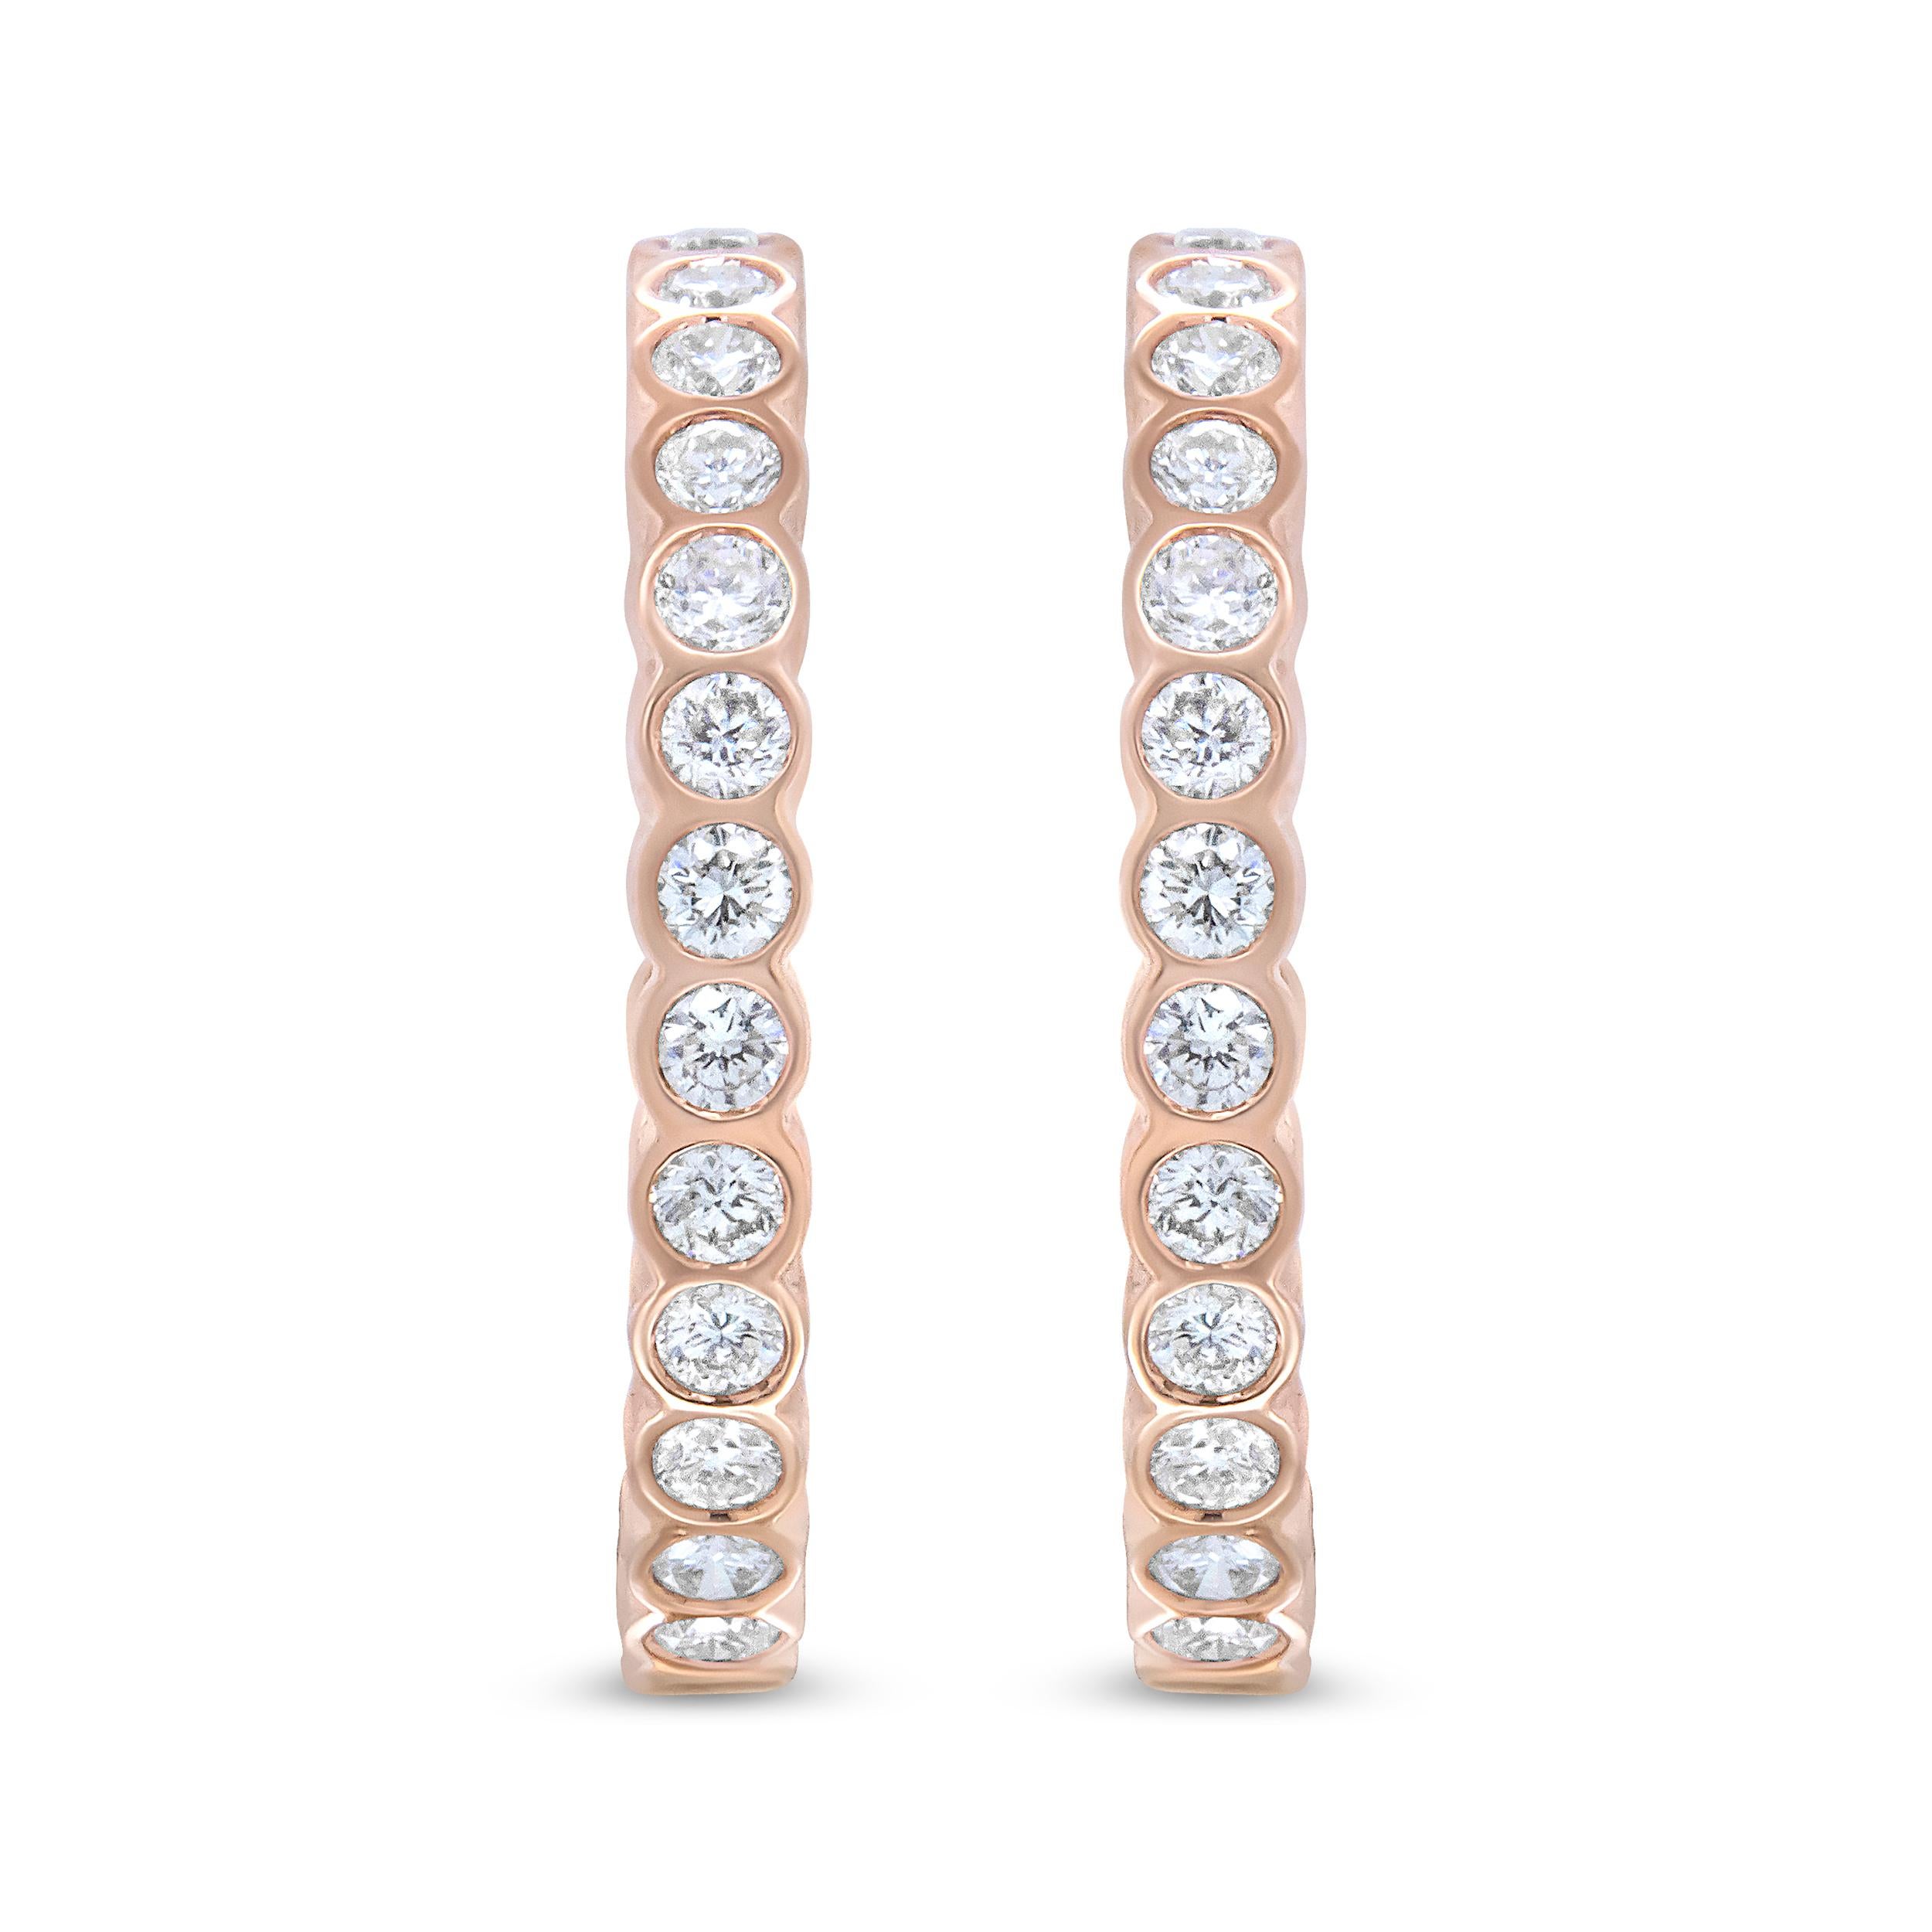 Every detail of this pair of 18k rose gold hoop earrings is crafted to perfection for a sparkling and captivating style that that is eminently wearable. A gorgeous arrangement of round white diamonds present their sparkle from the security of their